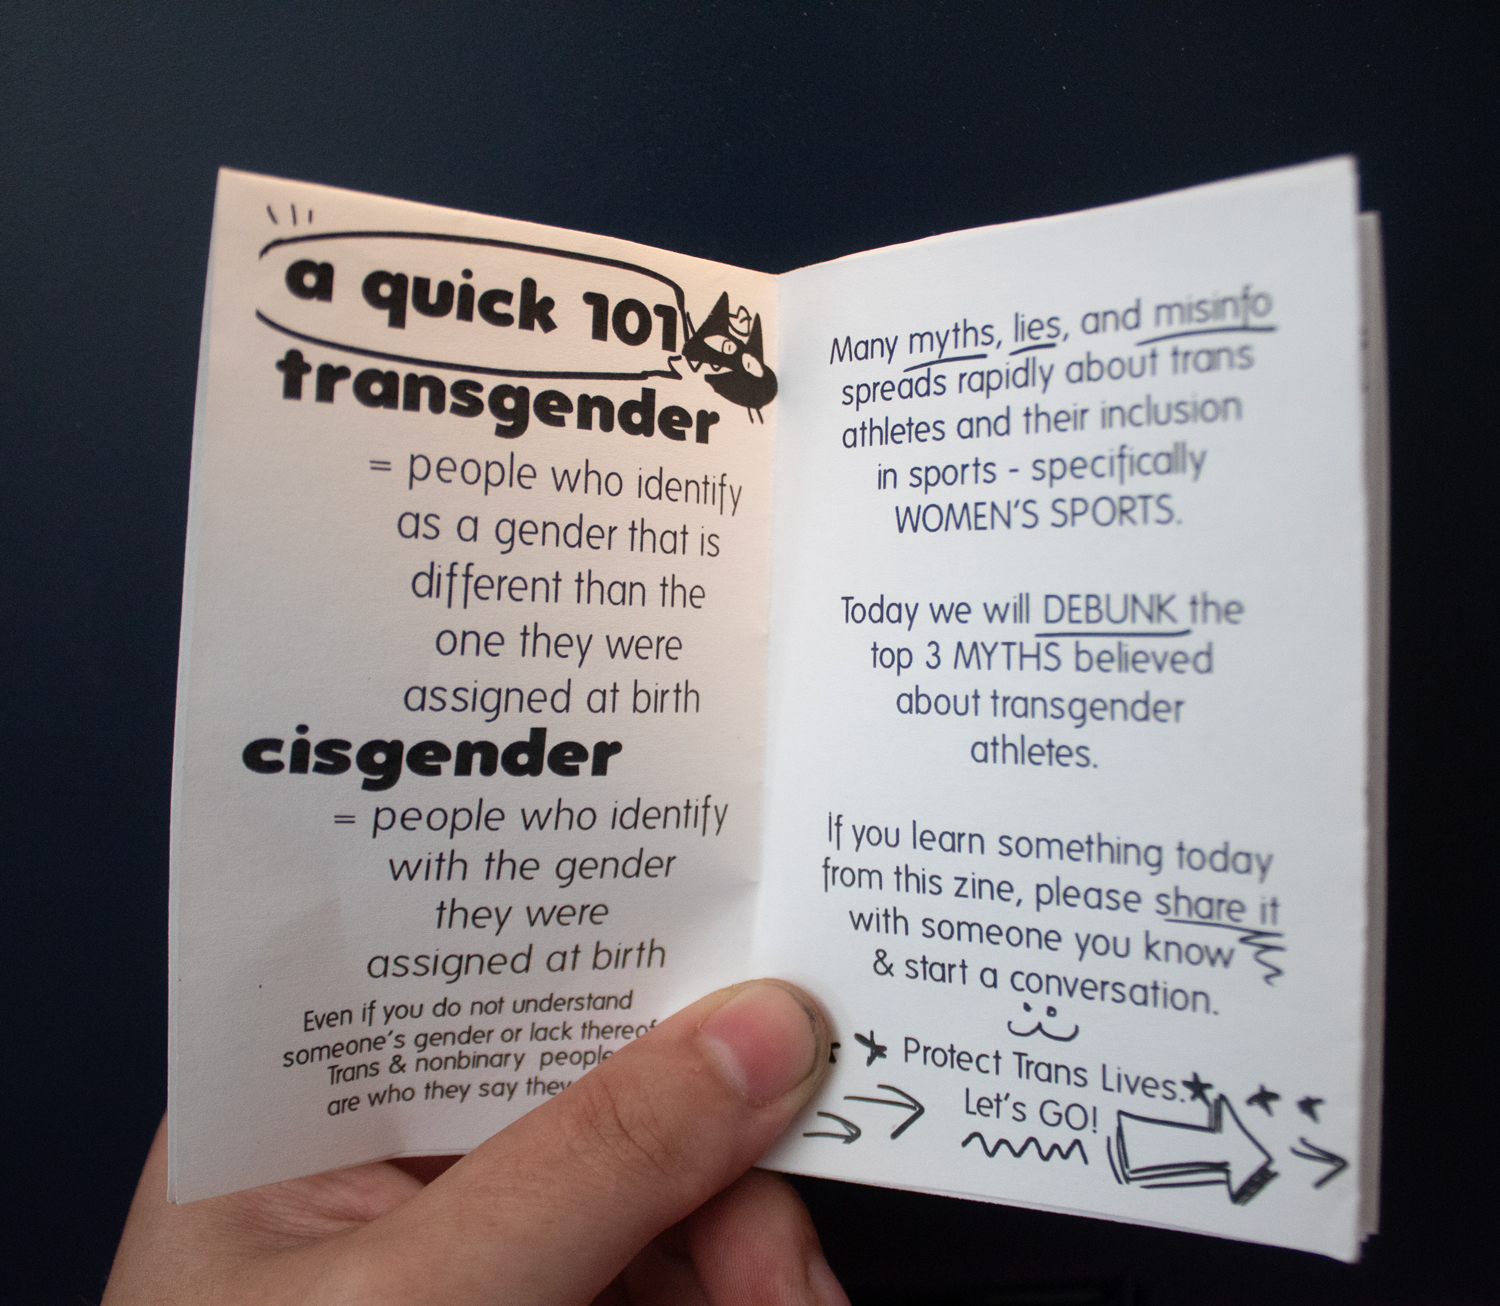 A quick 101: transgender = people who identify as a gender that is different than the one they were assigned at birth. Cisgender = people who identify with the gender they were assigned at birth. Many myths, lies and misinfo speads rapidly about trans athletes and their inclusion in sports - specifically women's sports. Today we will debunk the top 3 myths believed about transgender athletes. If you learn something today from this zine, please share it with someone you know & start a conversation. Protect Trans Lives. Let's go!